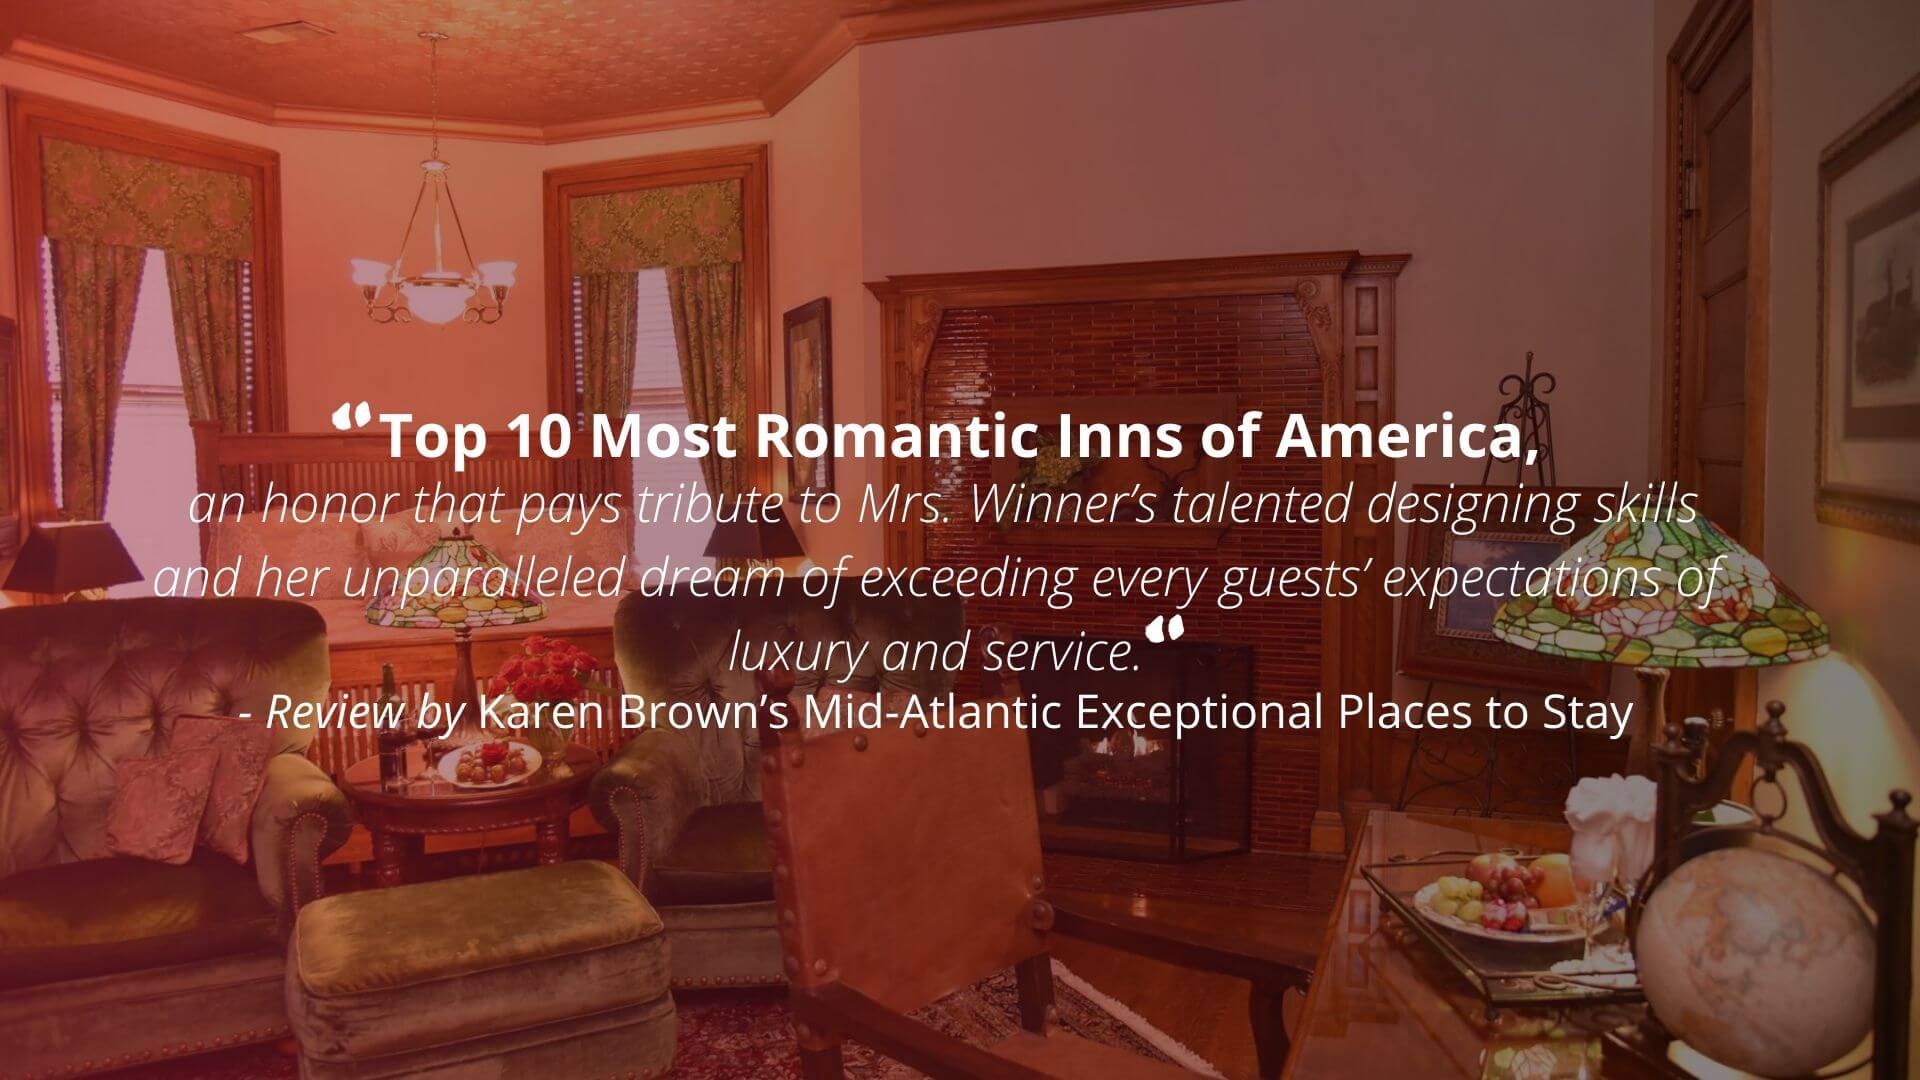 "Top 10 Most Romantic Inns of America, an honor that pays tribute to Mrs. Winner's talented designing skills and her unparalleled dream of exceeding every guests' expectations of luxury and service." - Review by Karen Brown’s Mid-Atlantic Exceptional Places to Stay